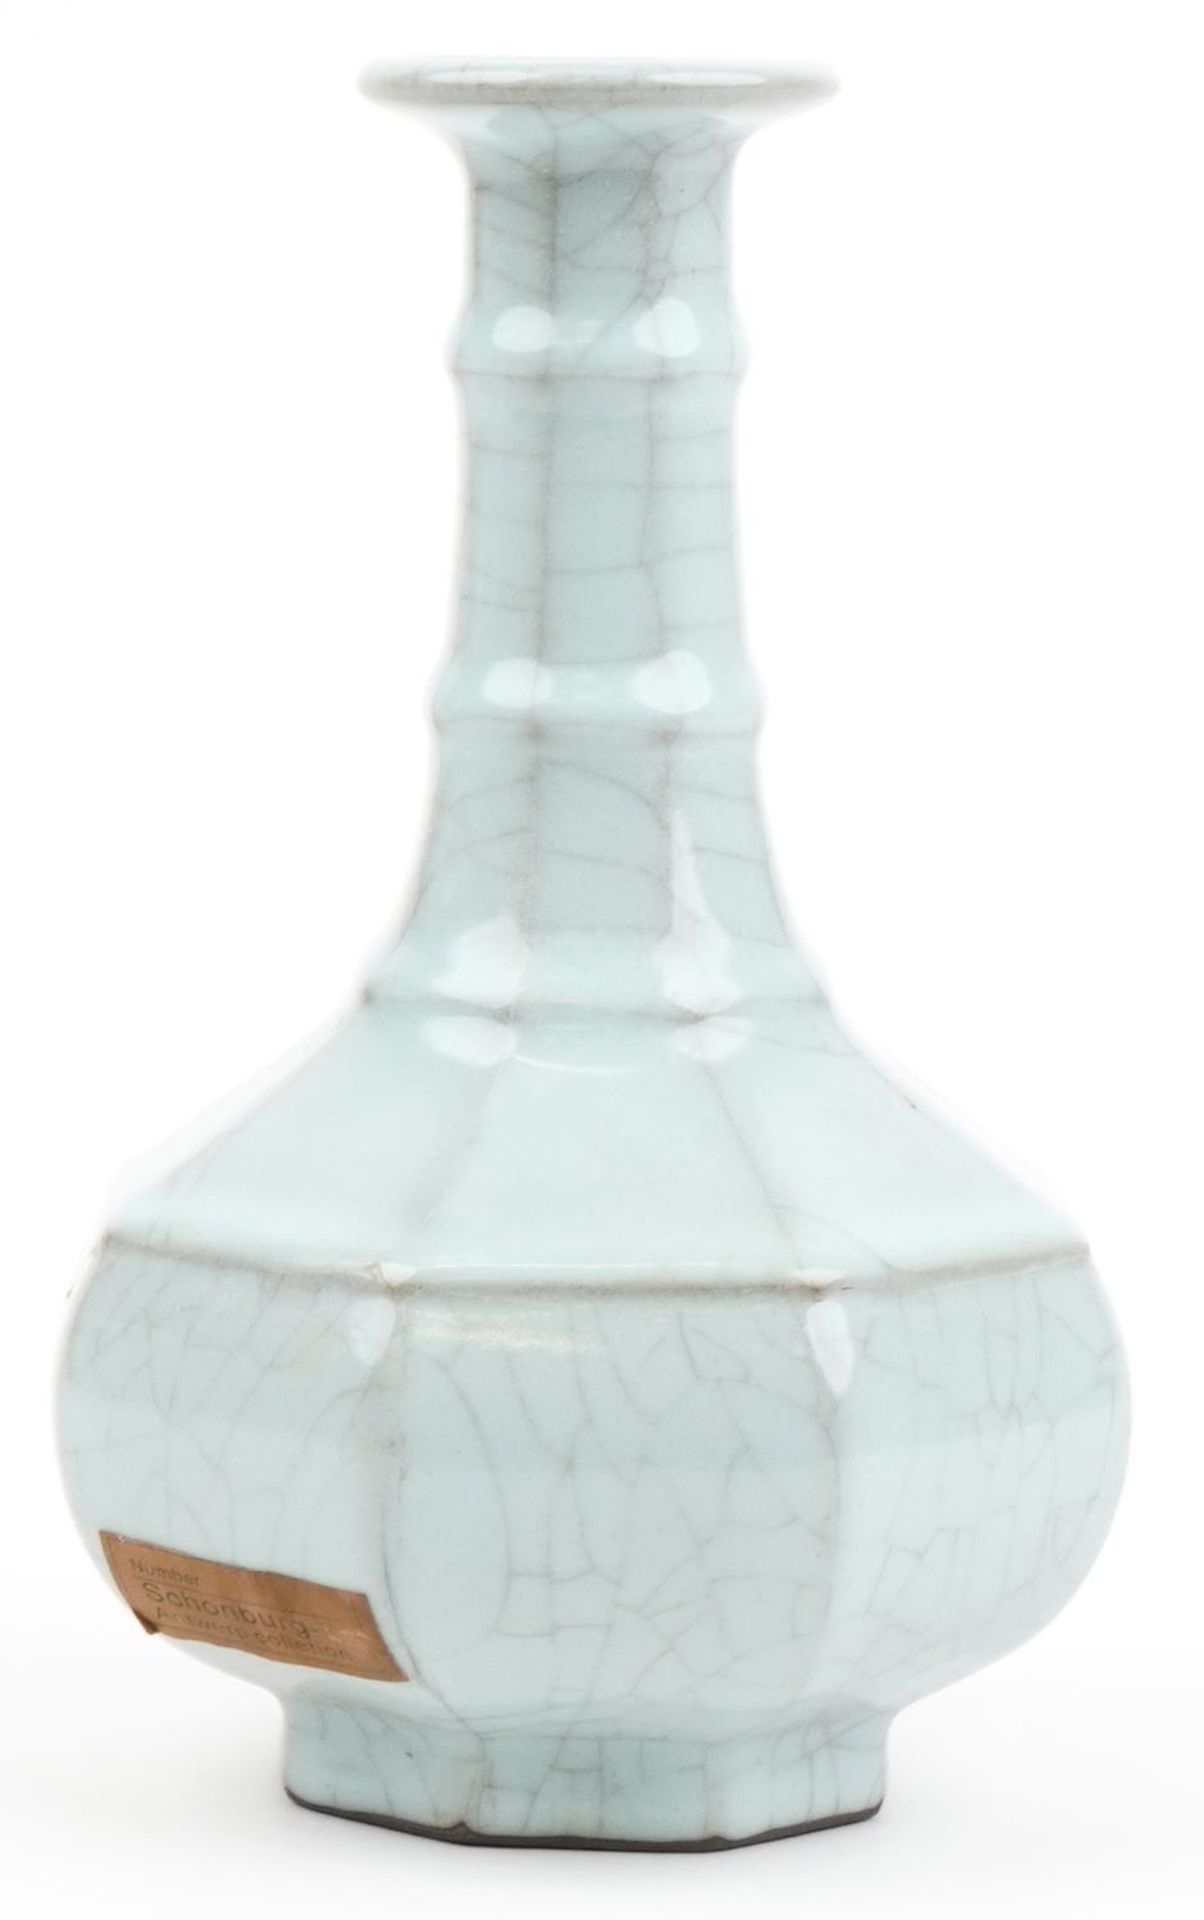 Chinese porcelain Ge ware type vase housed in a hardwood crate, 23cm high : For further - Image 5 of 9